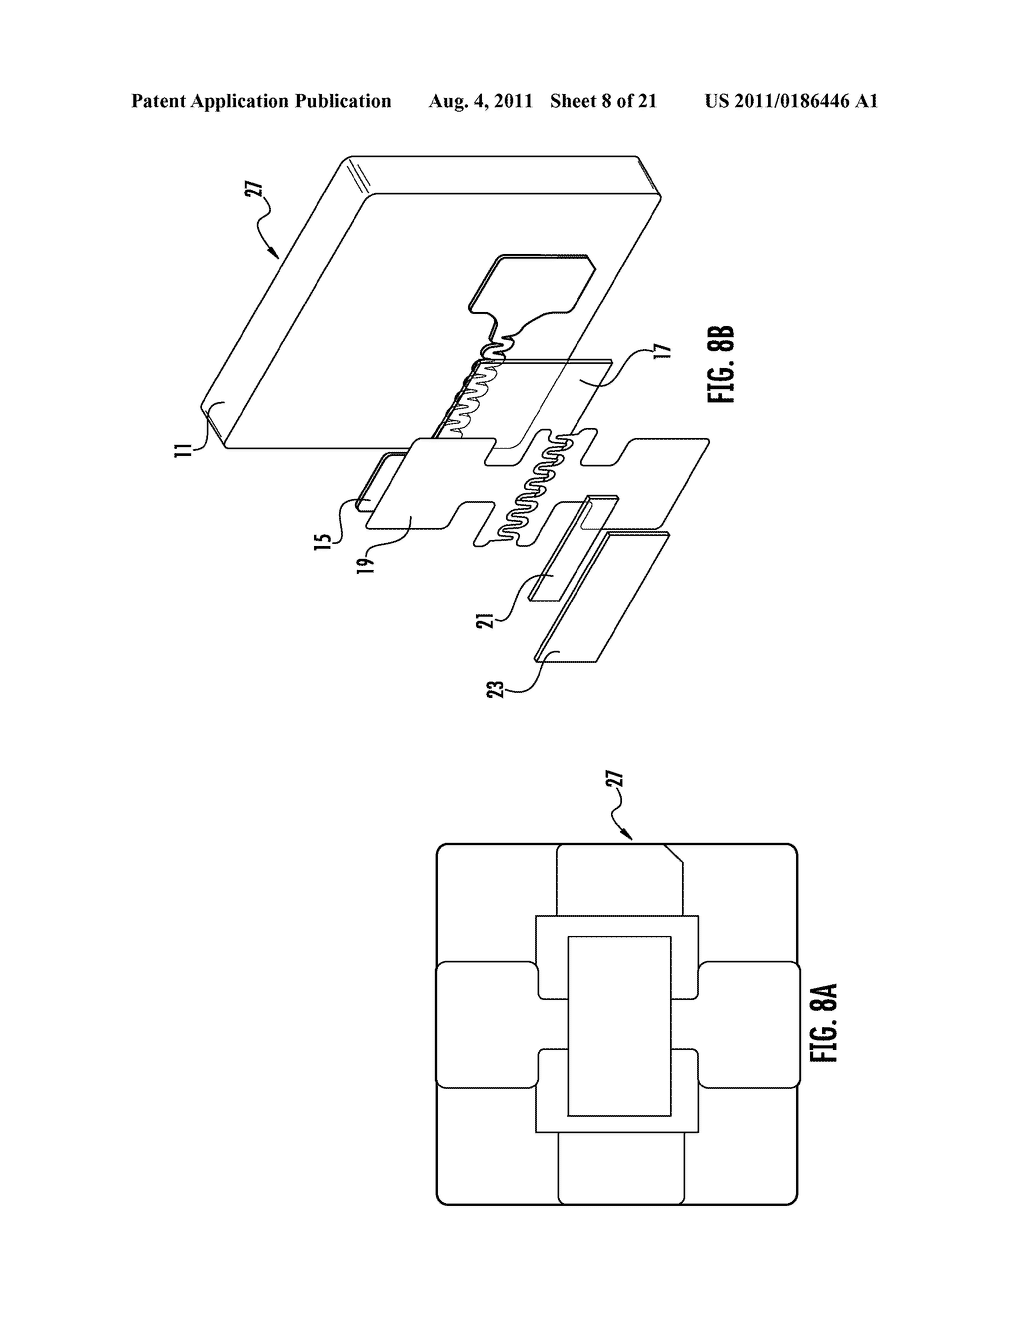 Method for Producing a Subminiature 